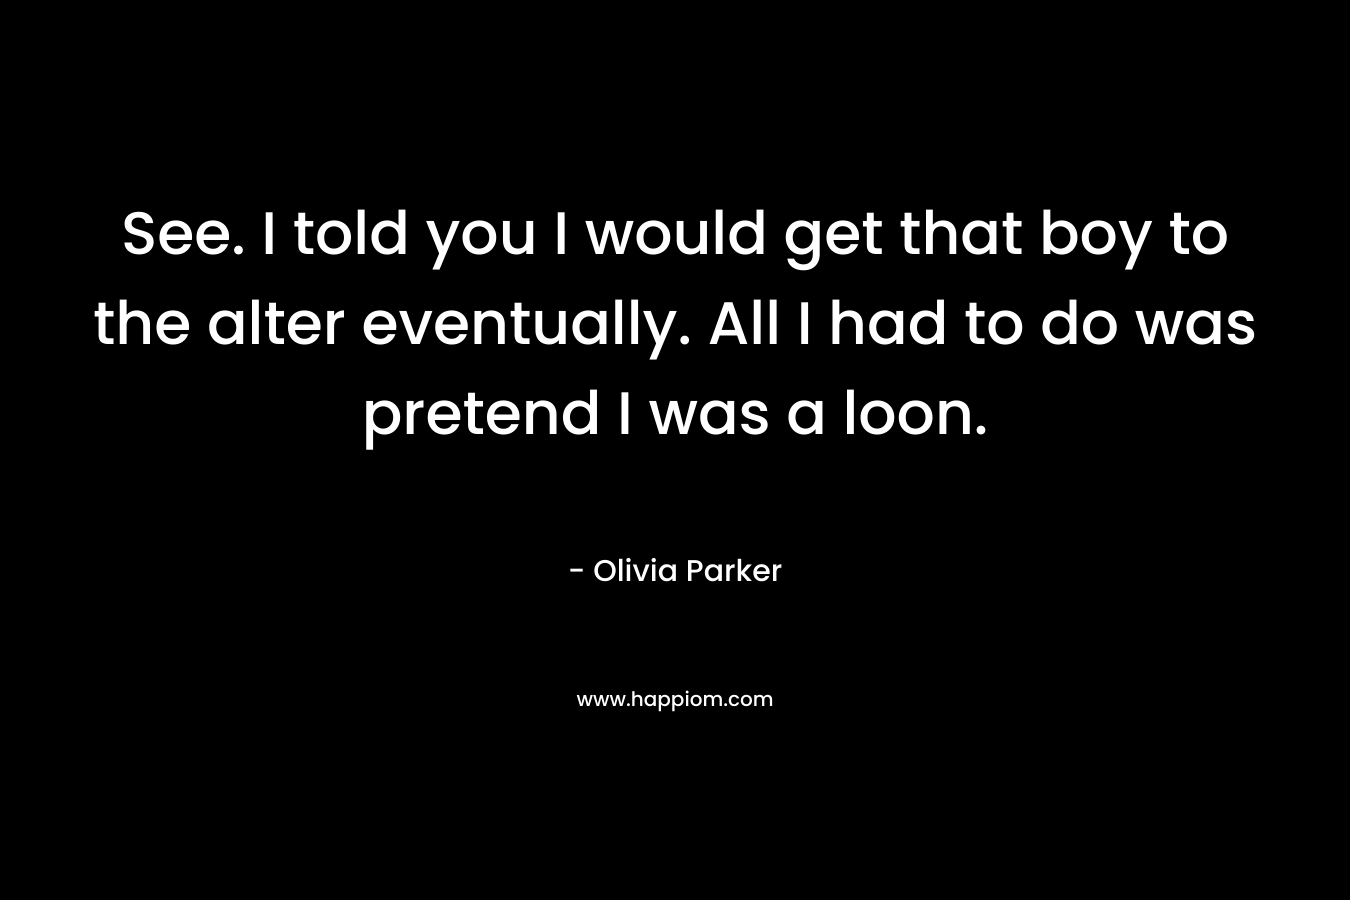 See. I told you I would get that boy to the alter eventually. All I had to do was pretend I was a loon. – Olivia Parker